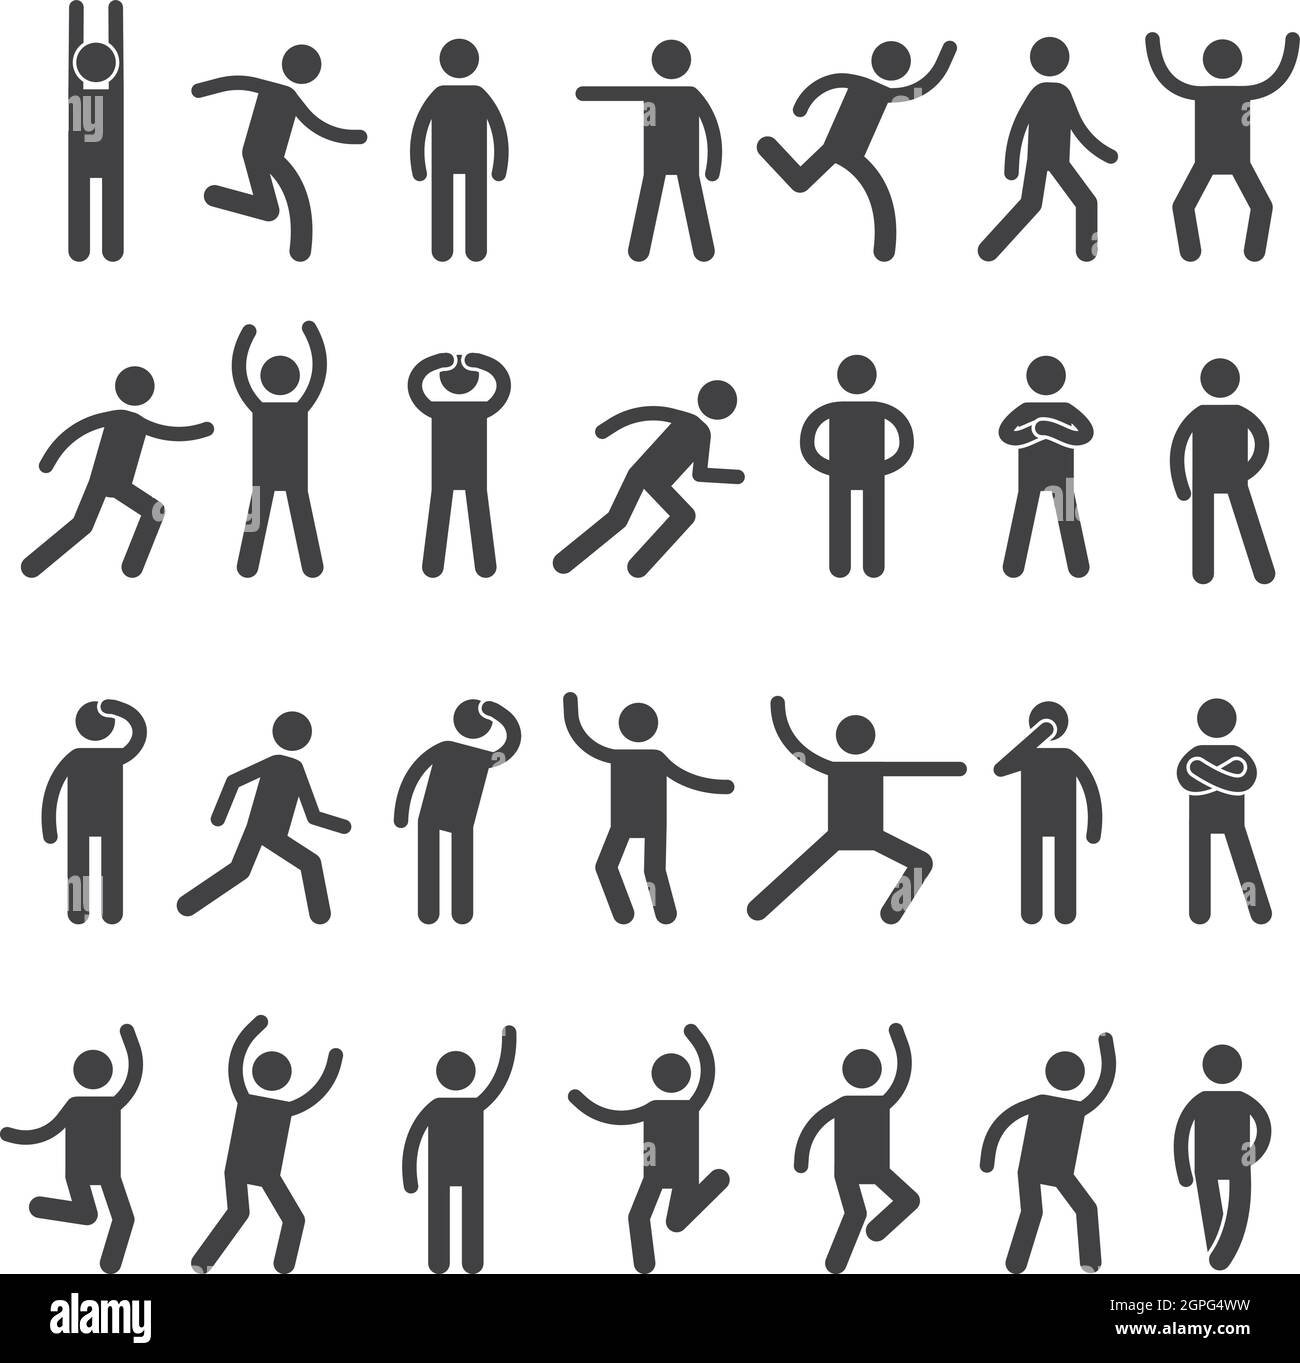 Image Details IST_43270_25364 - Stick people poses. Black silhouettes of stickman  characters in different action and posture, yoga and simple postures.  Vector isolated set of silhouette black figure illustration. Stick people  poses.